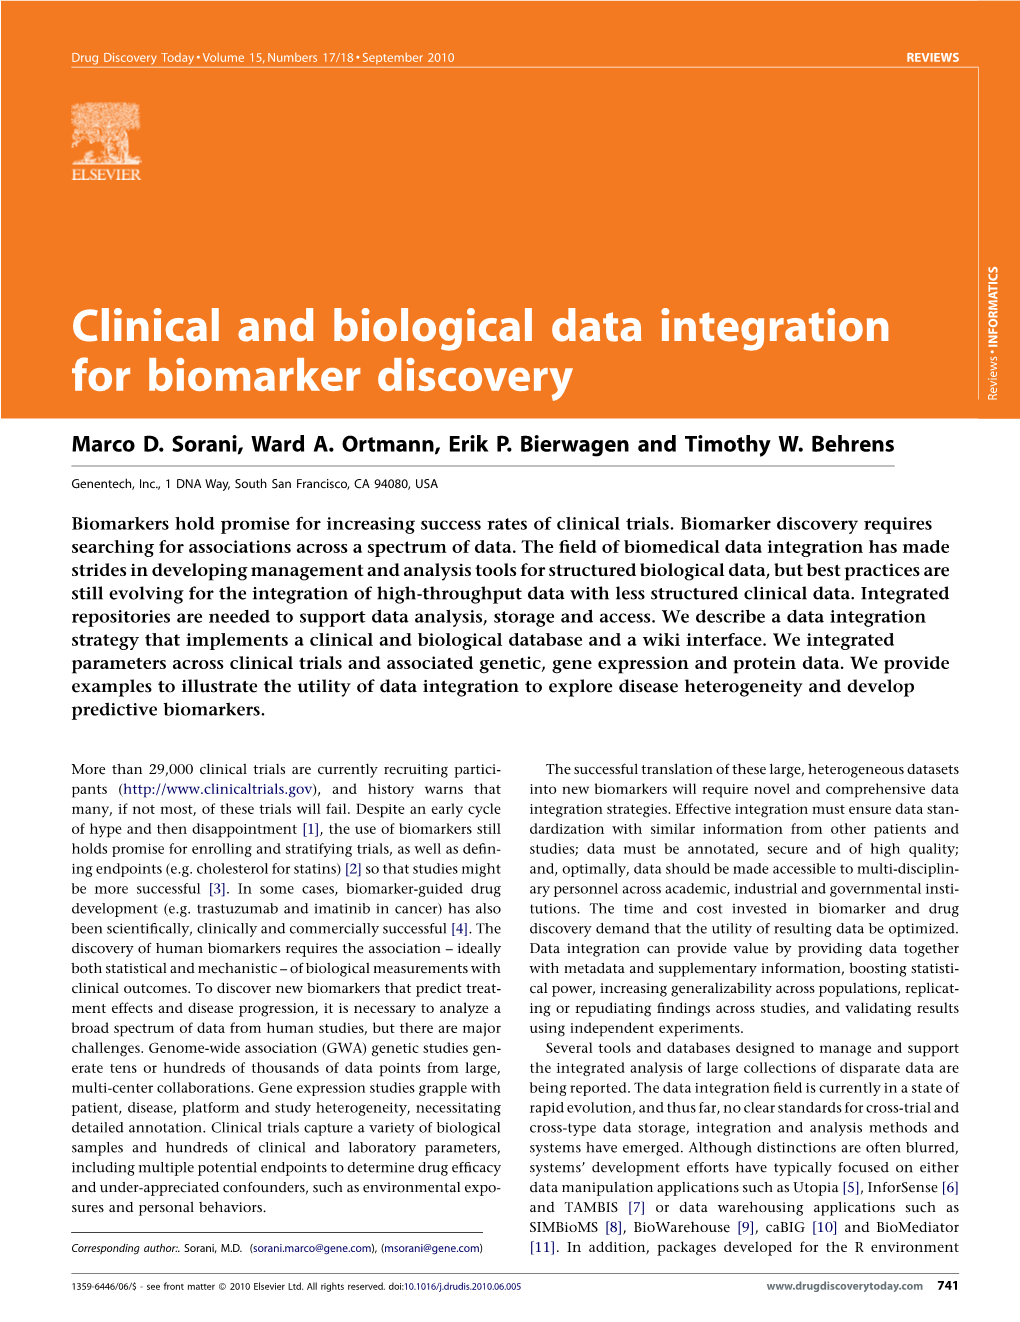 Clinical and Biological Data Integration for Biomarker Discovery